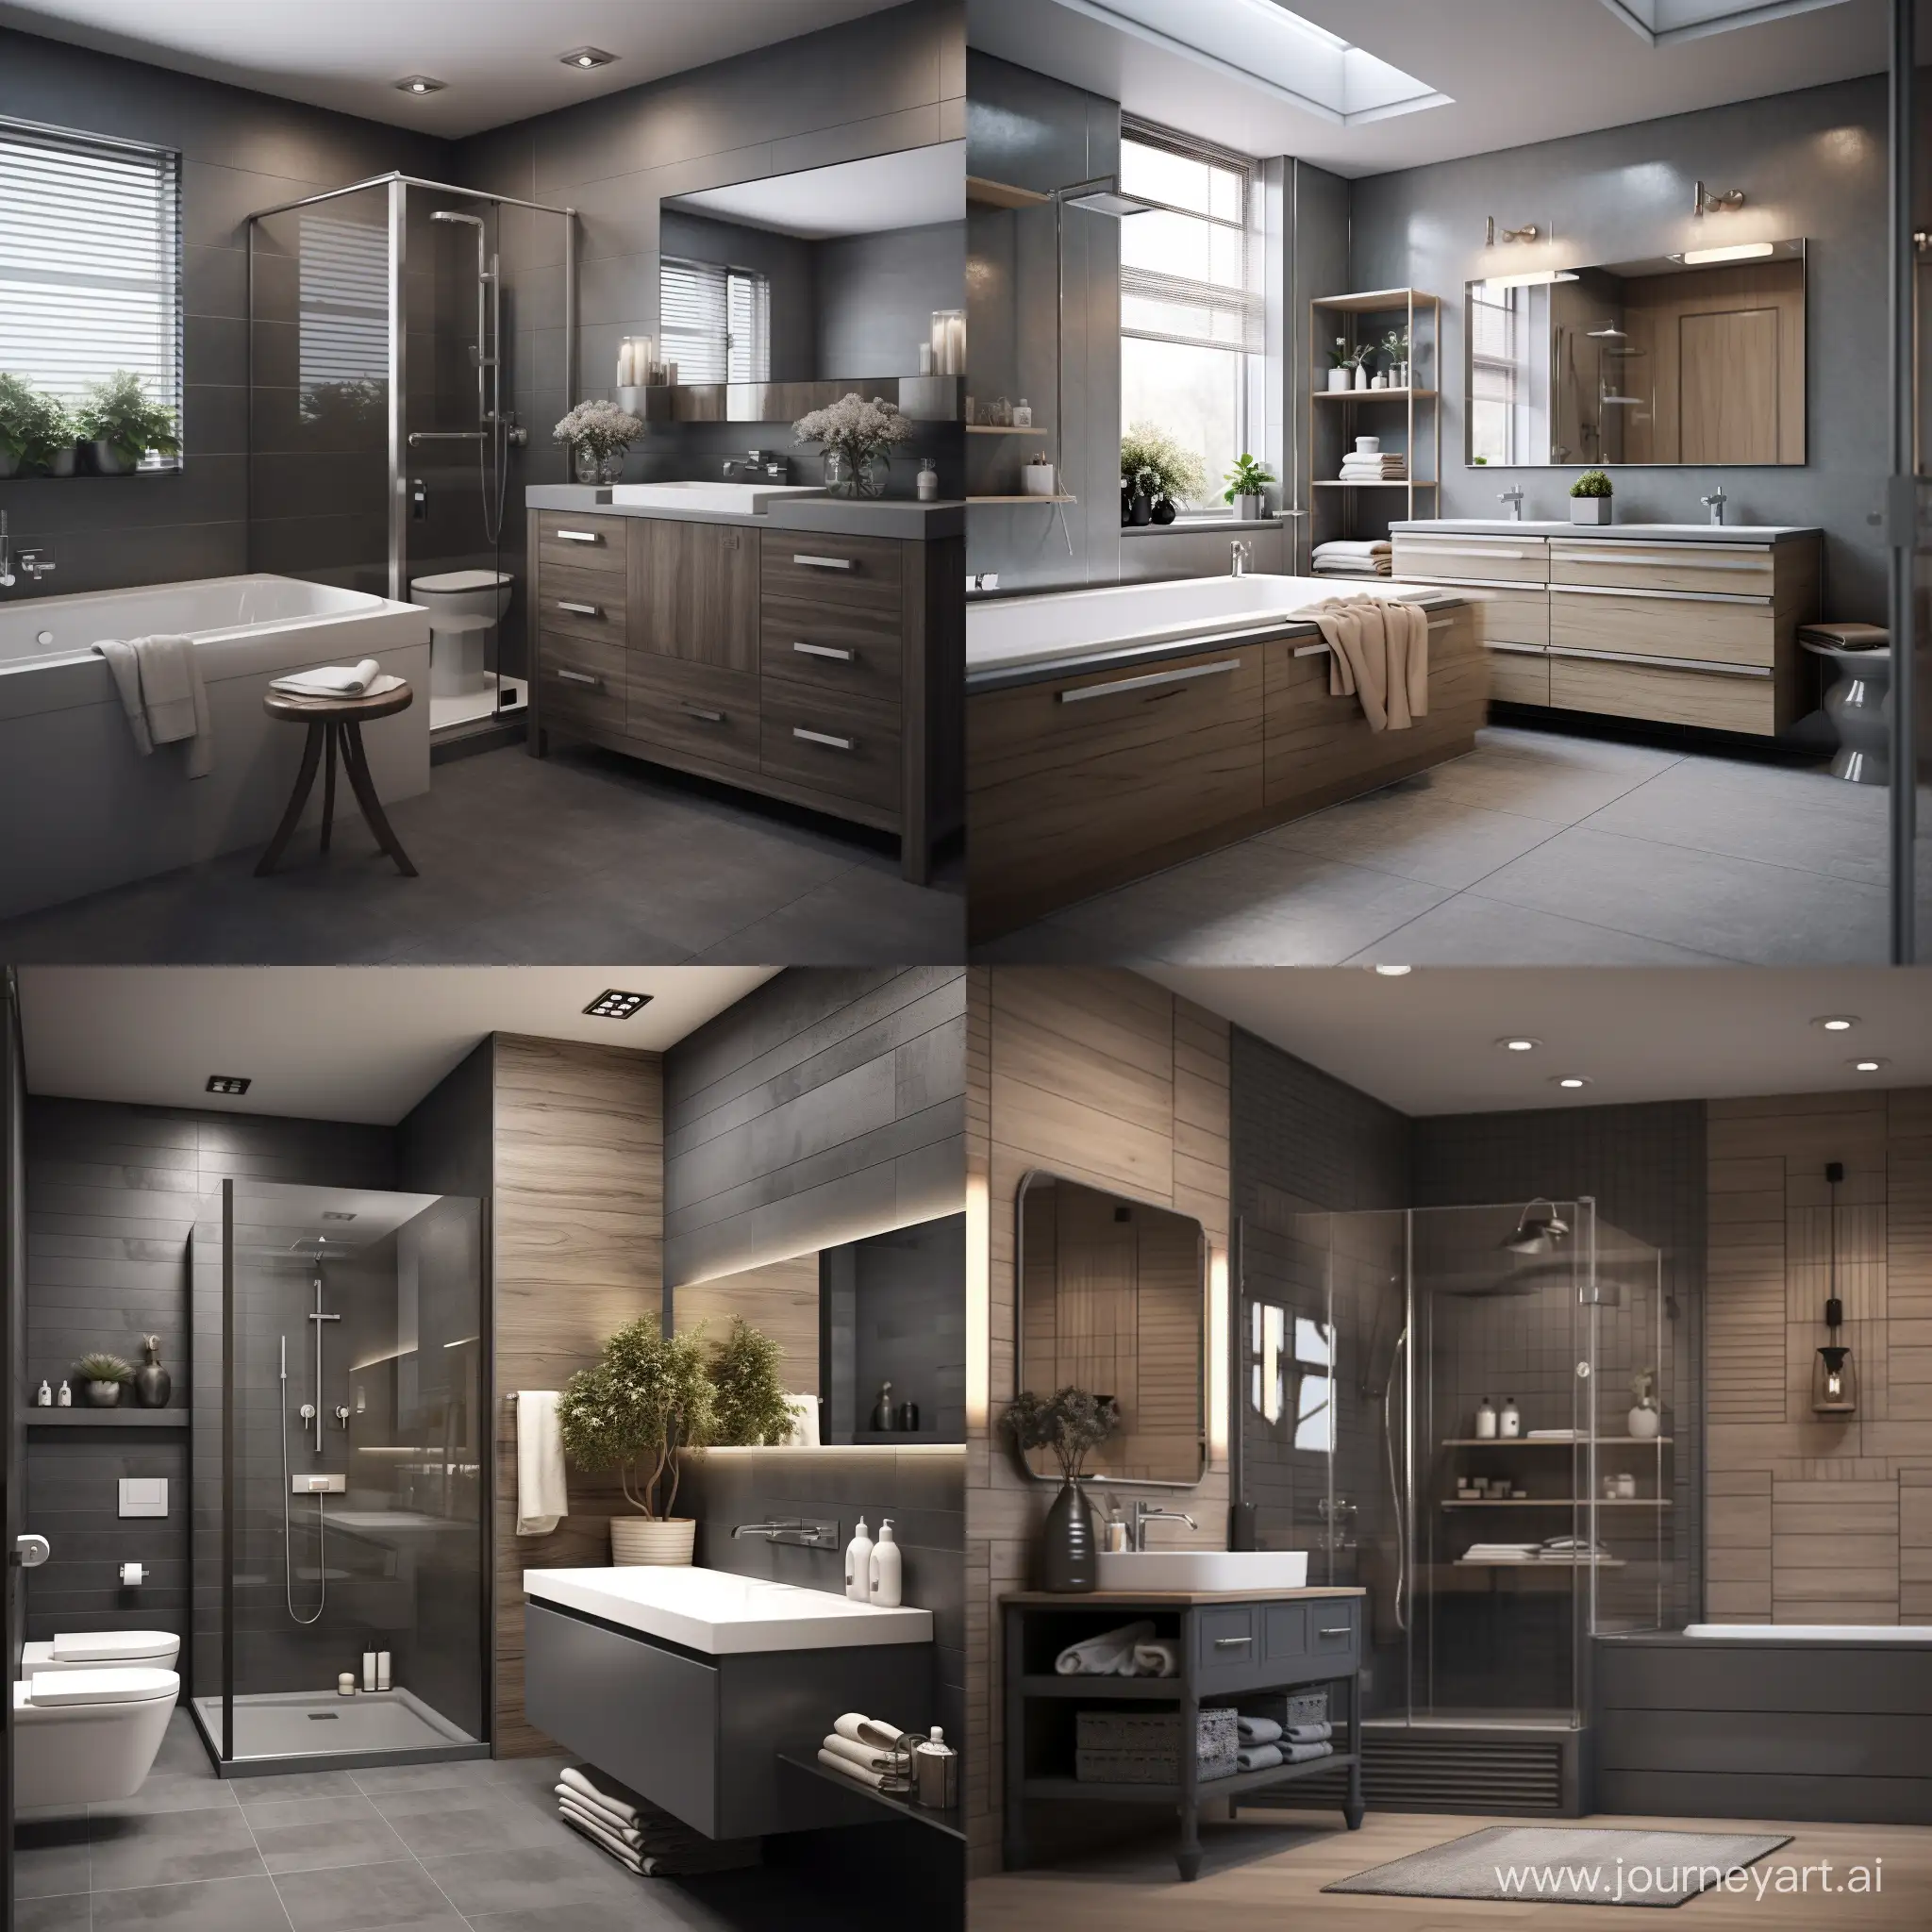 Modern-Gray-Toned-Bathroom-Design-with-Wooden-Accents